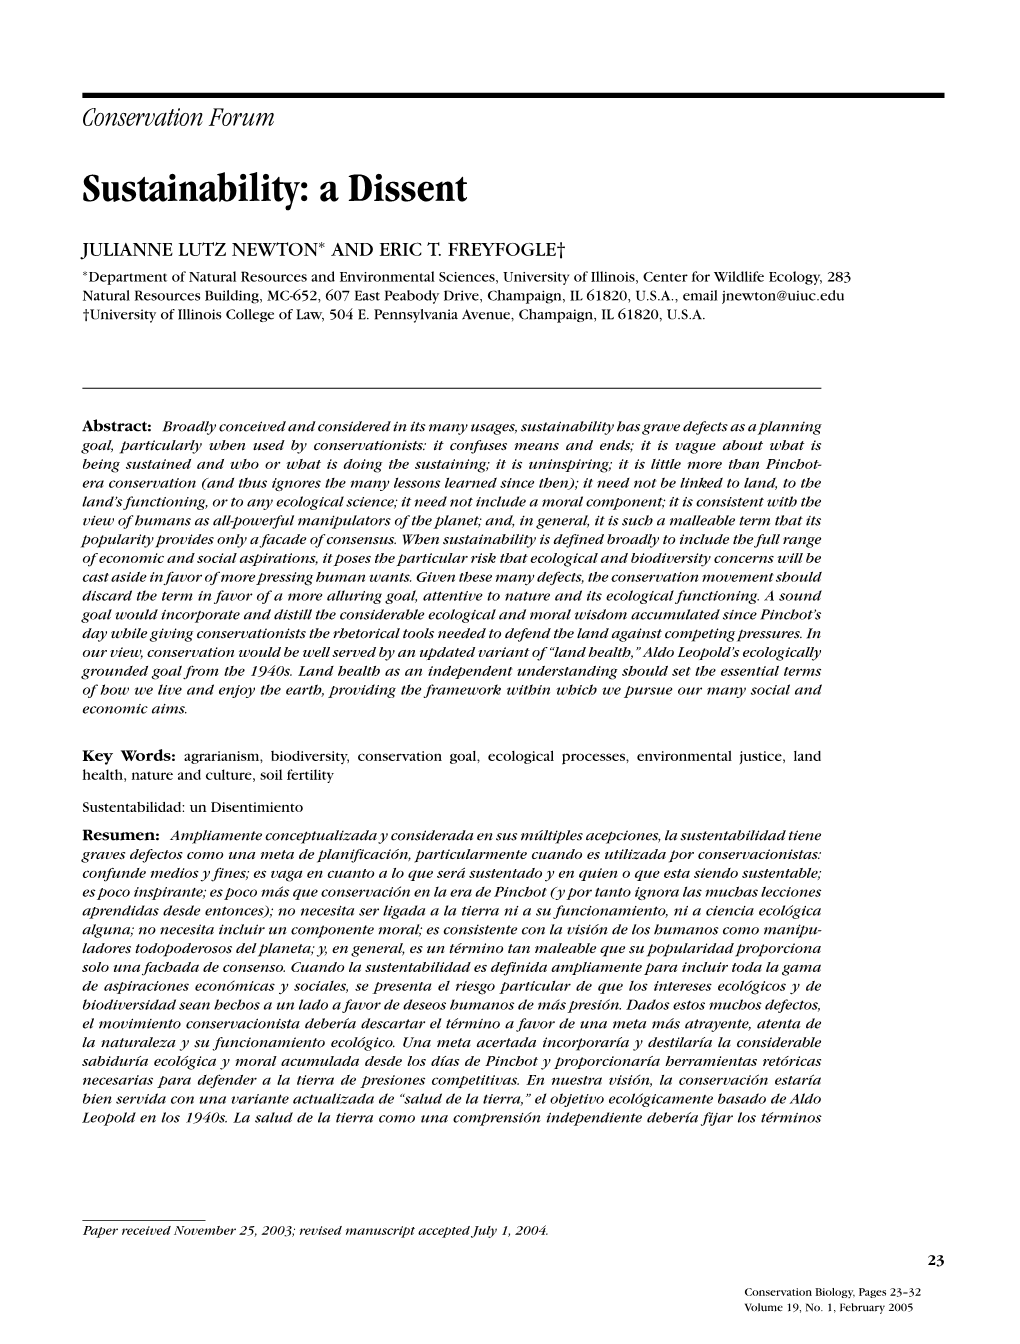 Sustainability: a Dissent